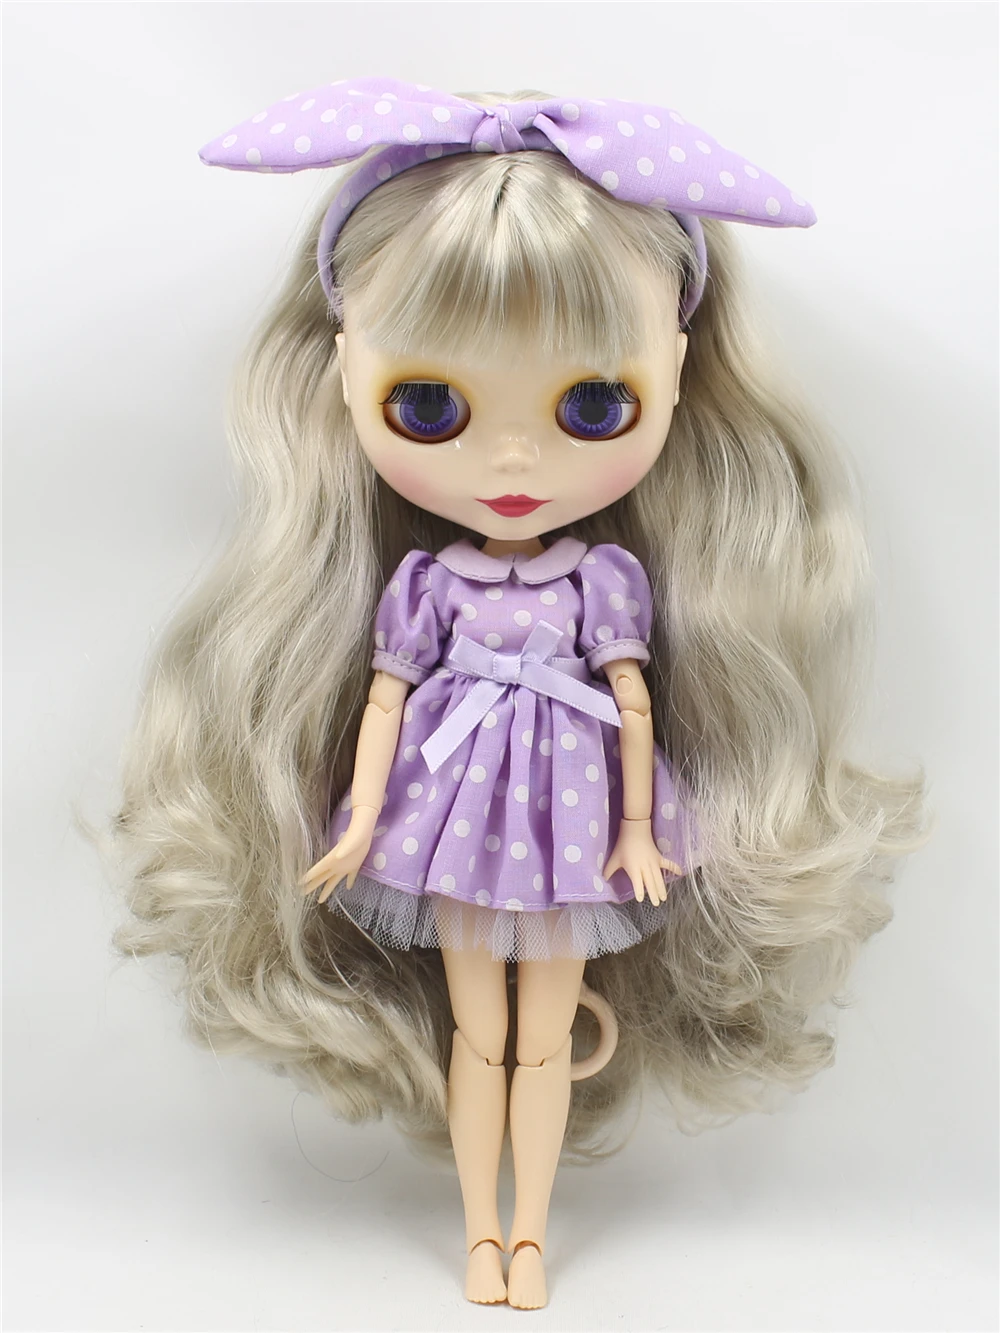 Neo Blythe Doll with Grey Hair, White Skin, Shiny Face & Jointed Body 2